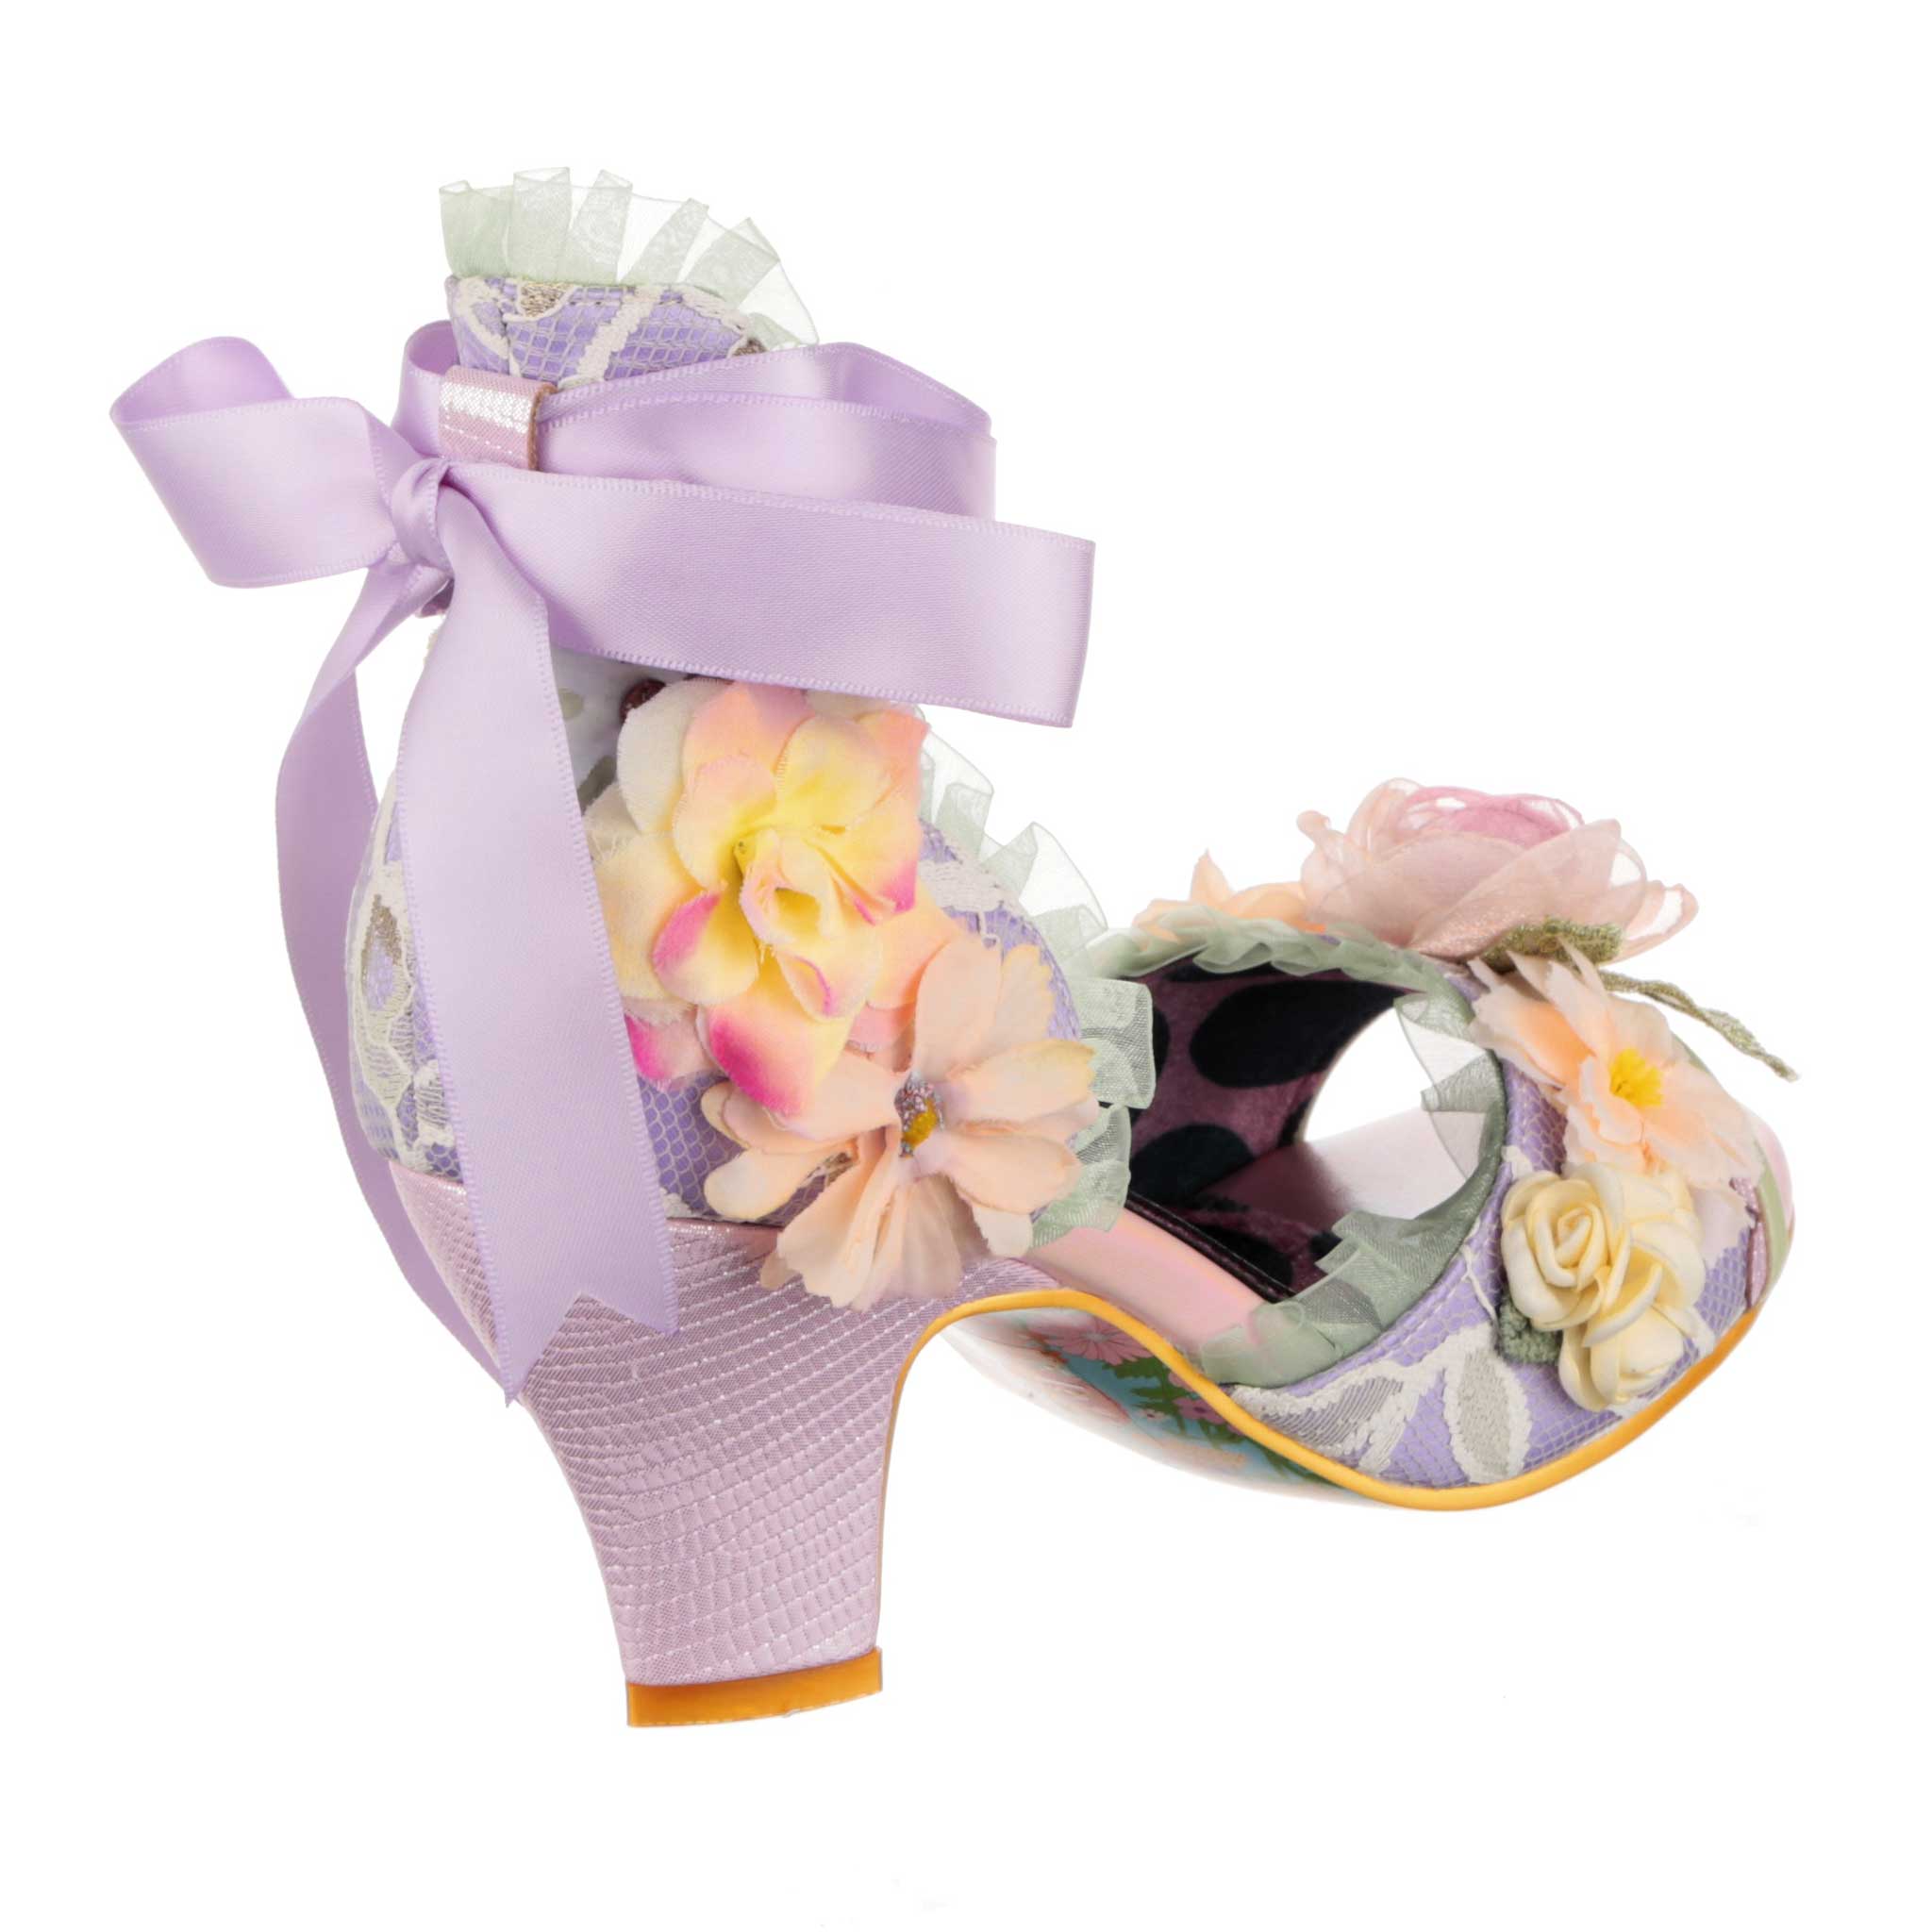 Irregular Choice Womens By Any Other Name Sandal - Lilac